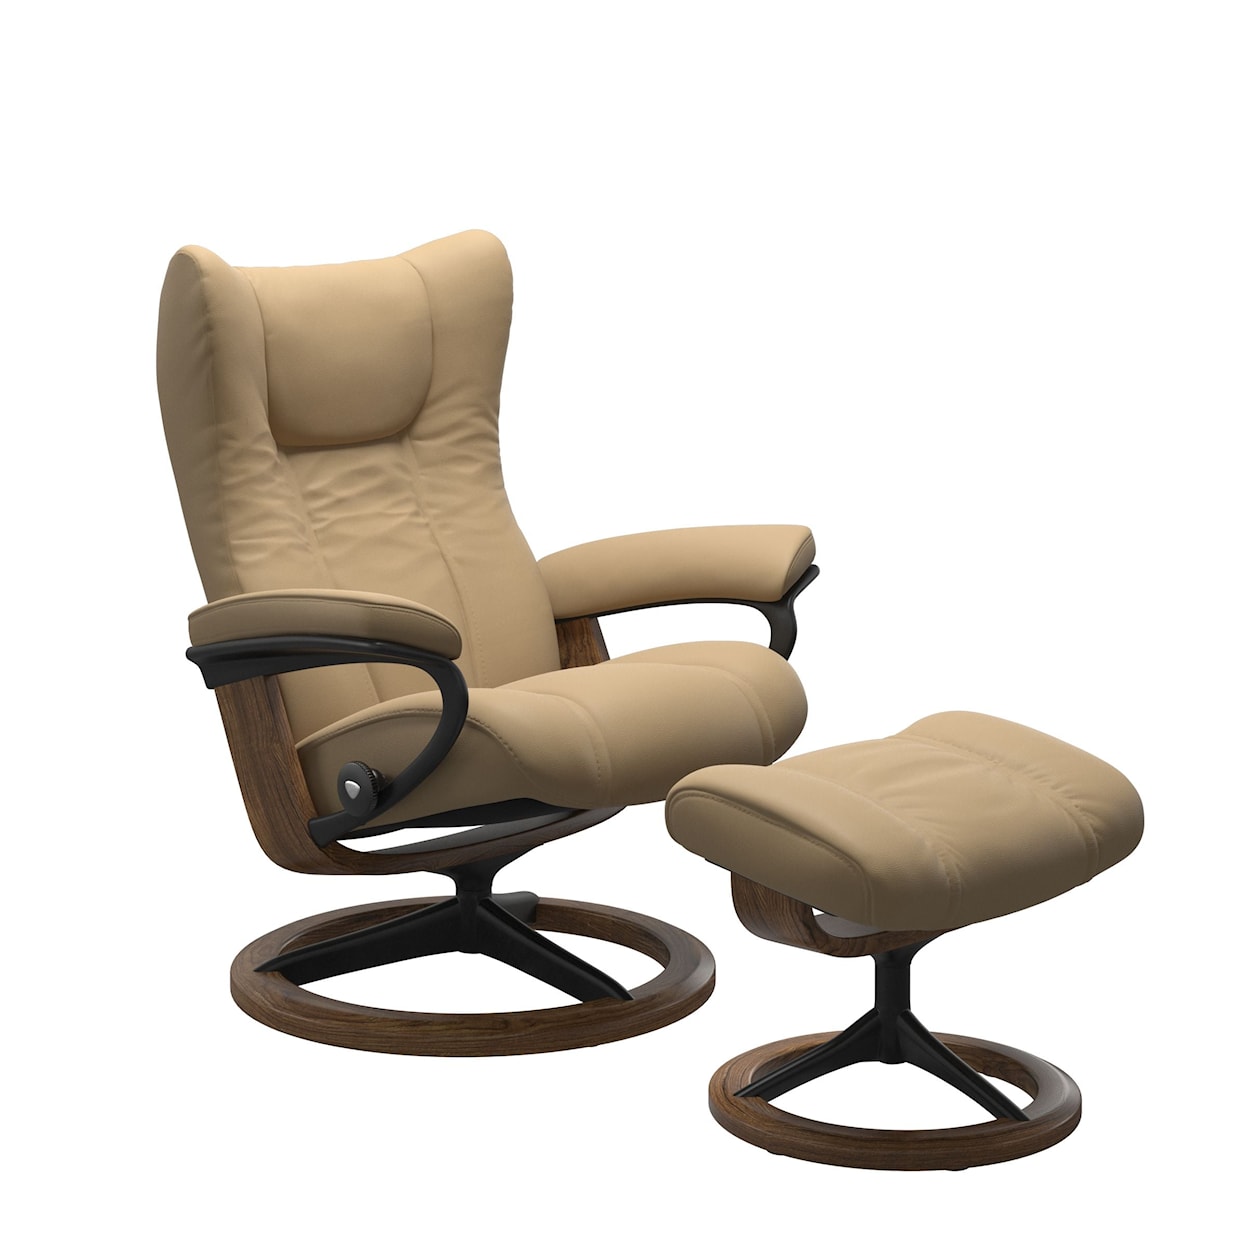 Stressless by Ekornes Wing Medium Chair & Ottoman with Signature Base